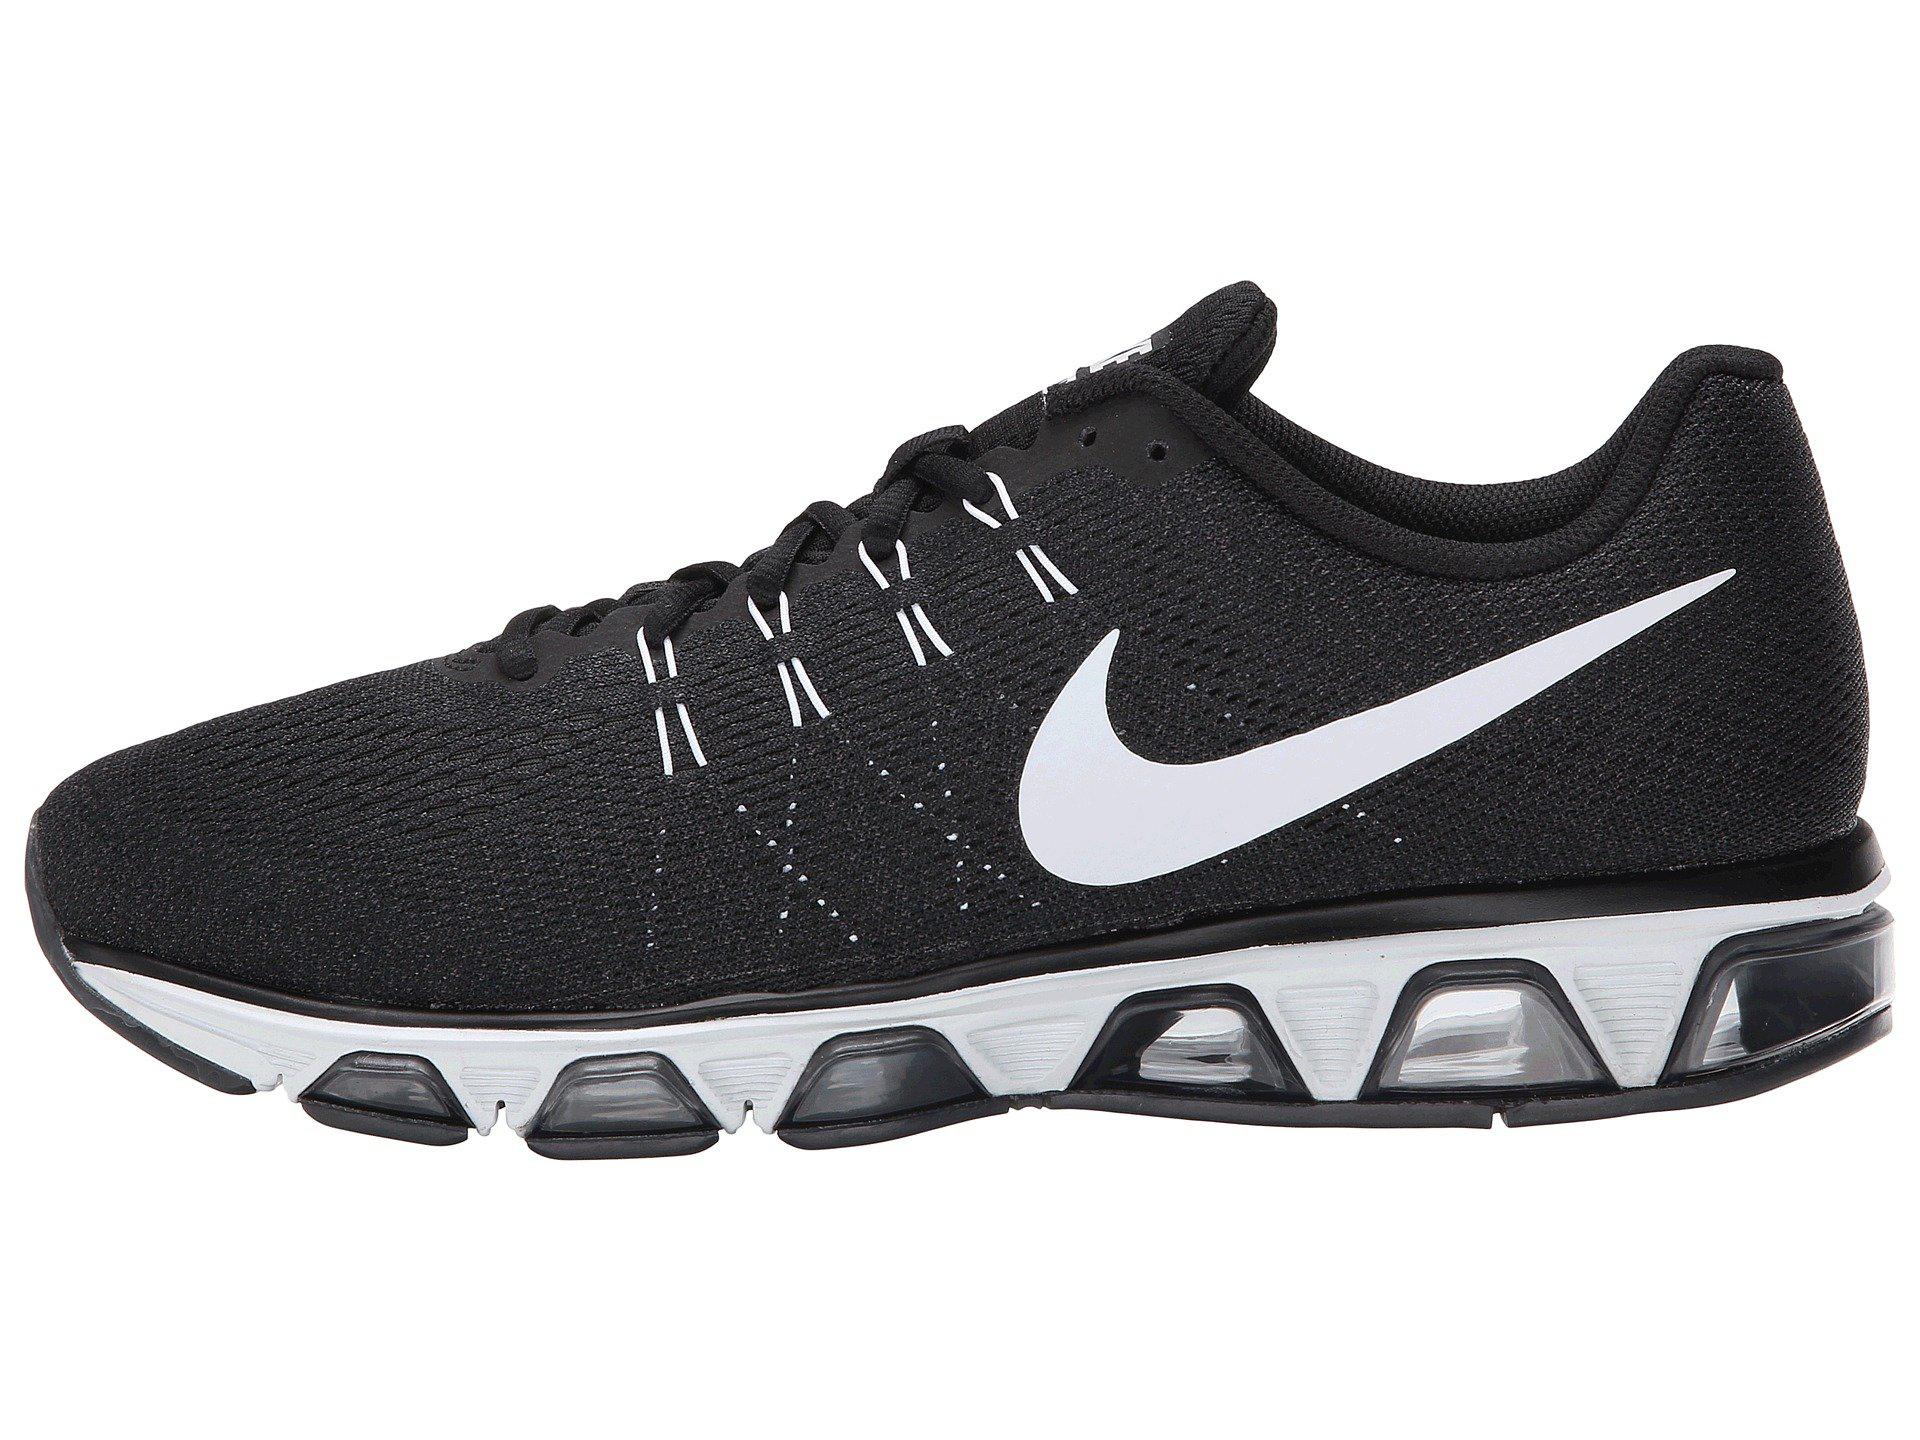 Lyst - Nike Air Max Tailwind 8 in Black for Men